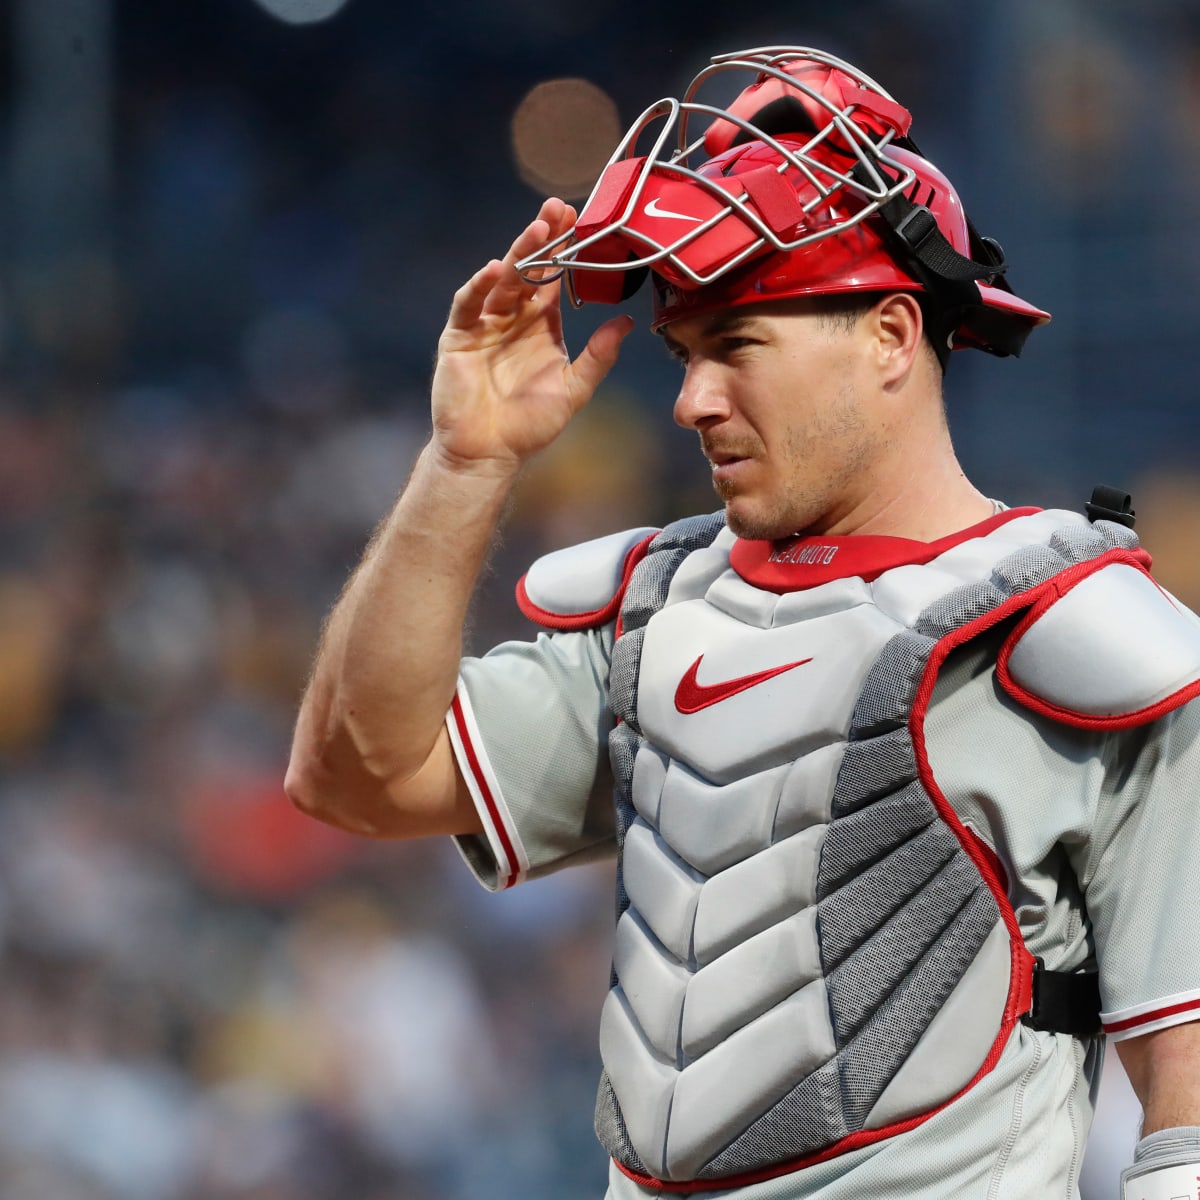 J.T. Realmuto talks about why the Phillies are so loose after no